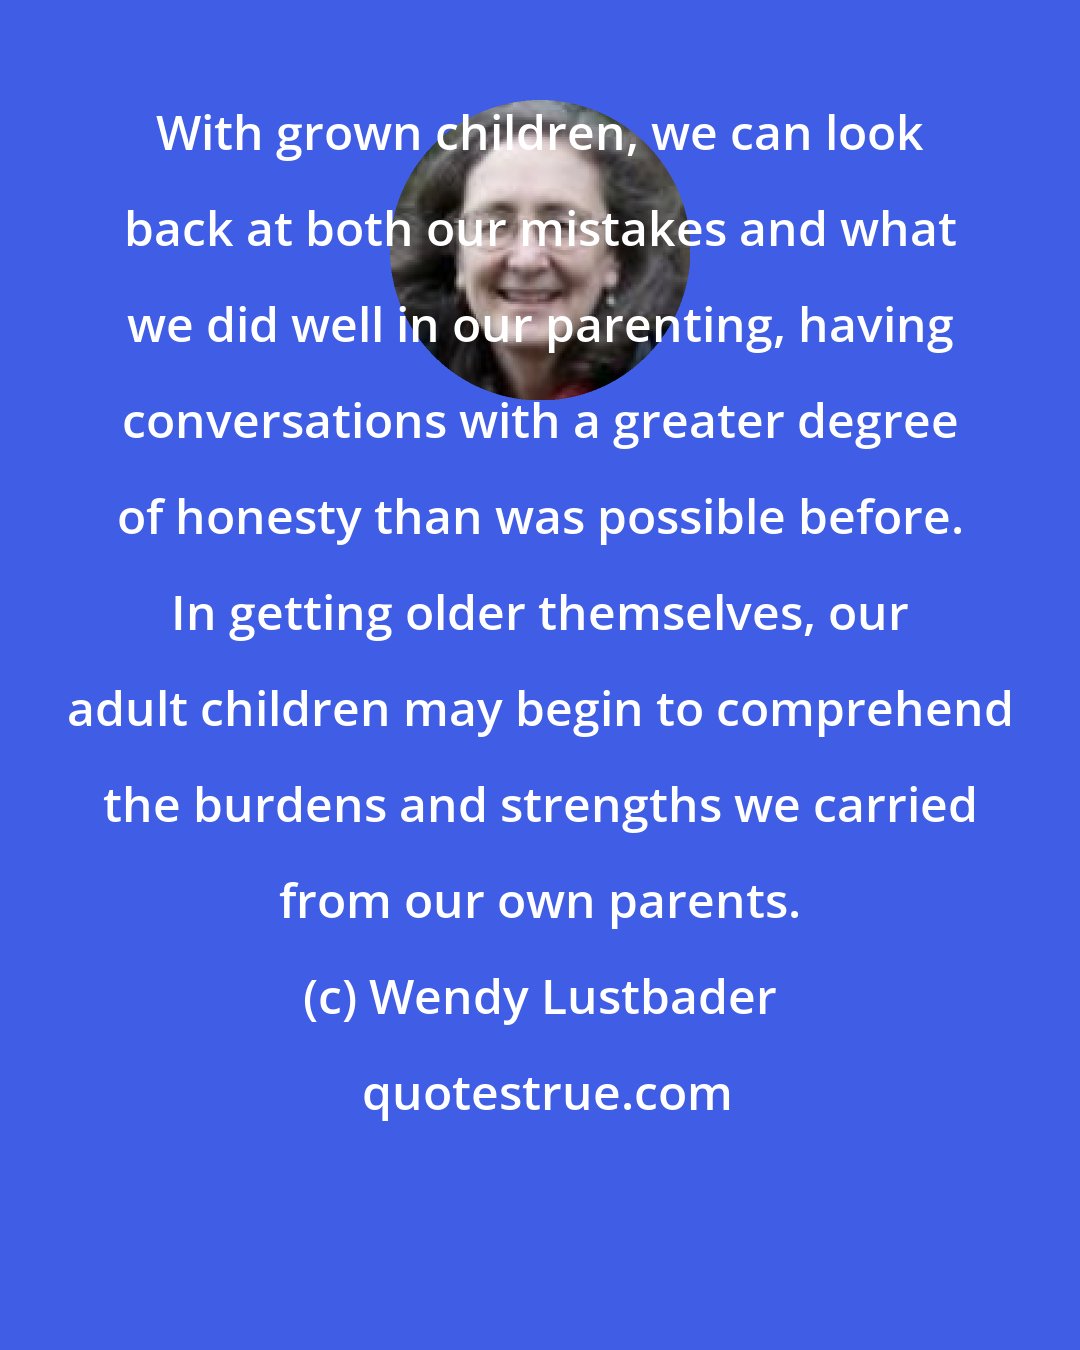 Wendy Lustbader: With grown children, we can look back at both our mistakes and what we did well in our parenting, having conversations with a greater degree of honesty than was possible before. In getting older themselves, our adult children may begin to comprehend the burdens and strengths we carried from our own parents.